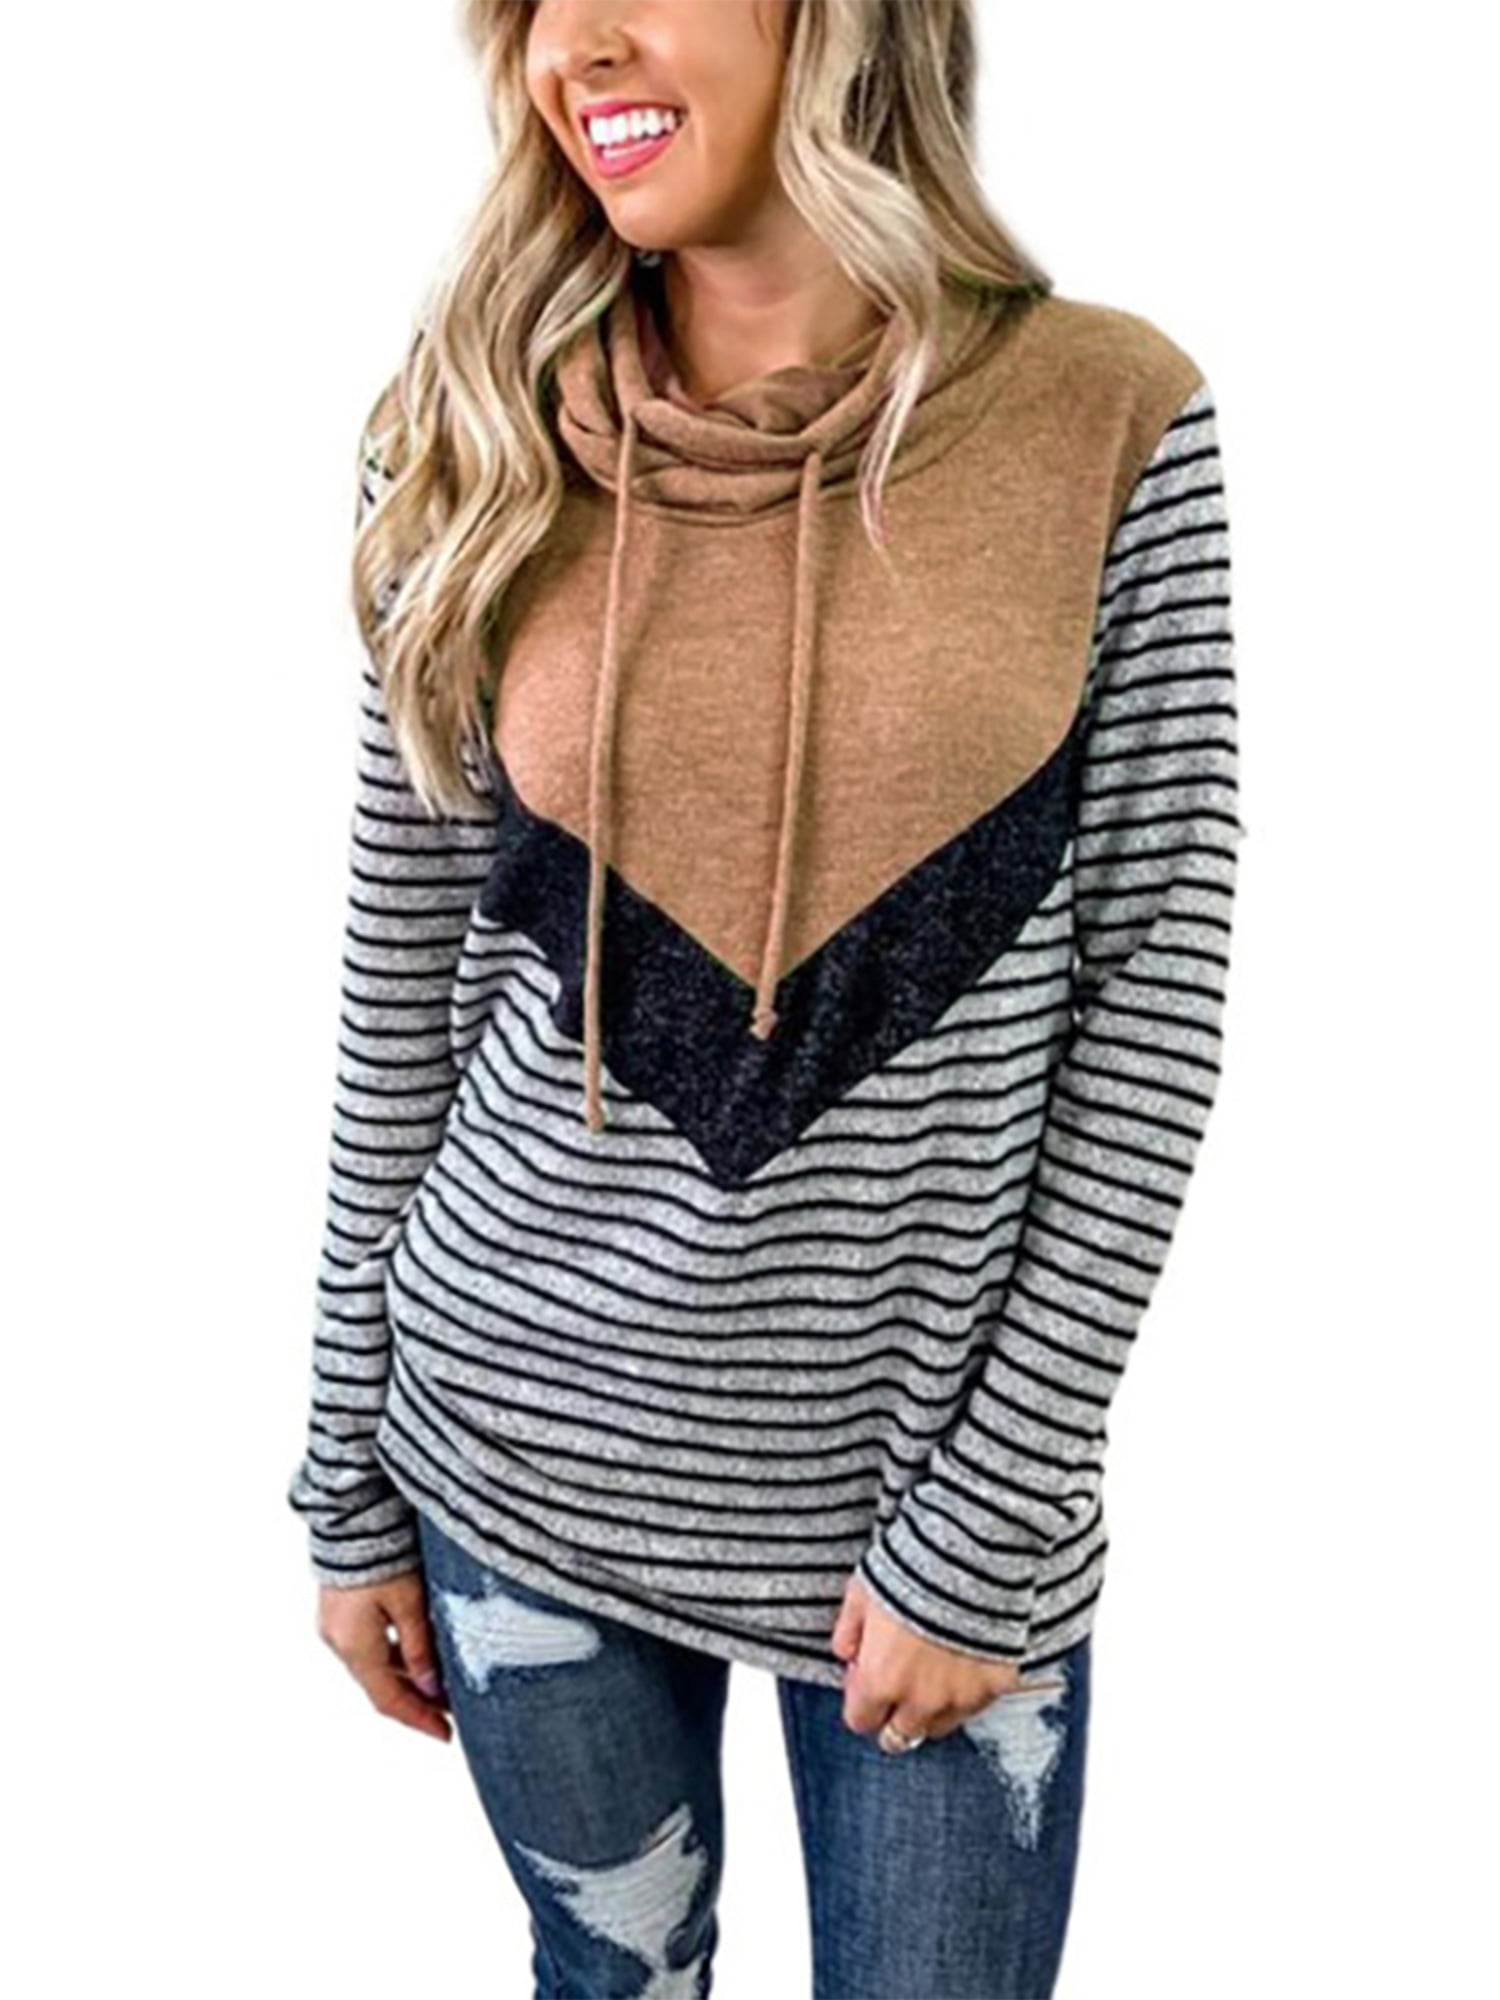 HOTAPEI Women Cowl Neck Drawstring Sweatshirts Striped/Color Block Long Sleeve Pullover Tops with Pockets